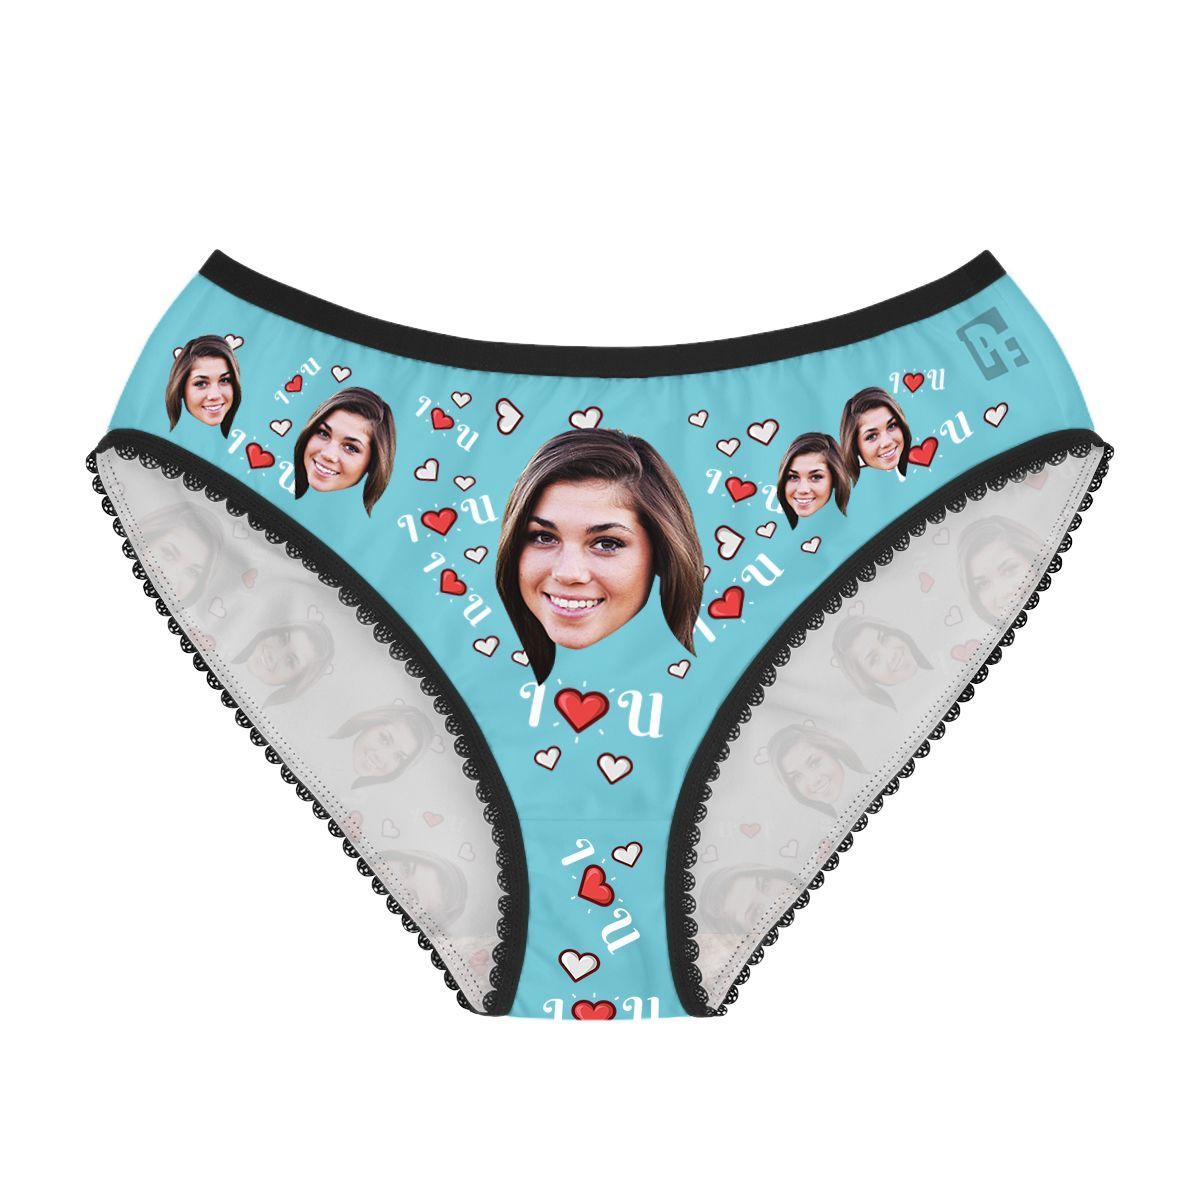 Blue I <3 You women's underwear briefs personalized with photo printed on them